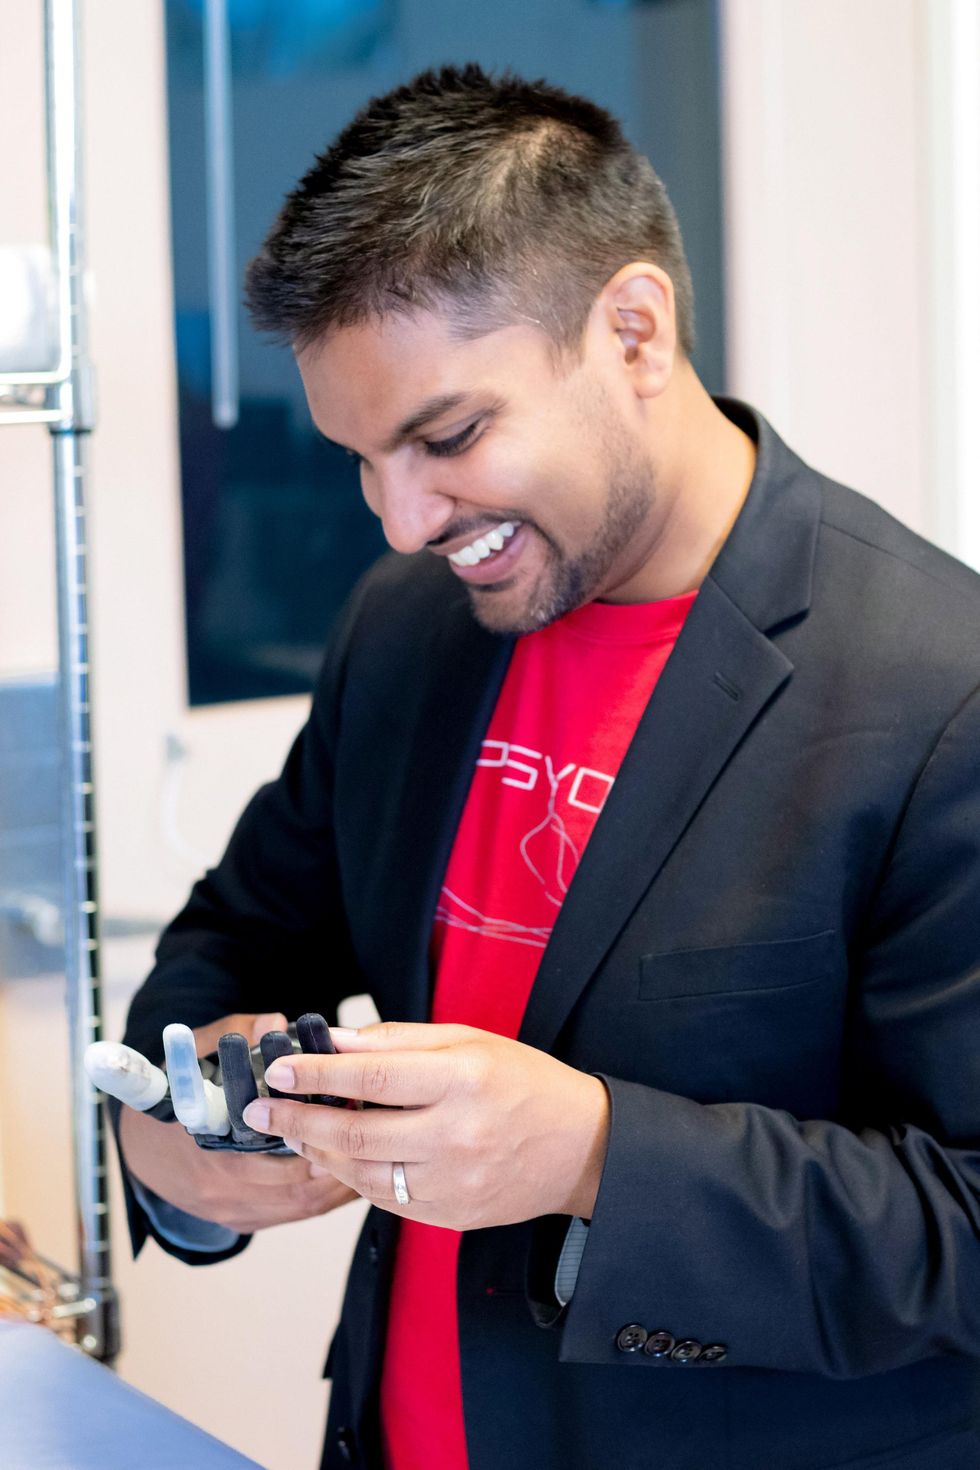 A person in a red shirt and jacket smiling and looking at a prosthetic hand.